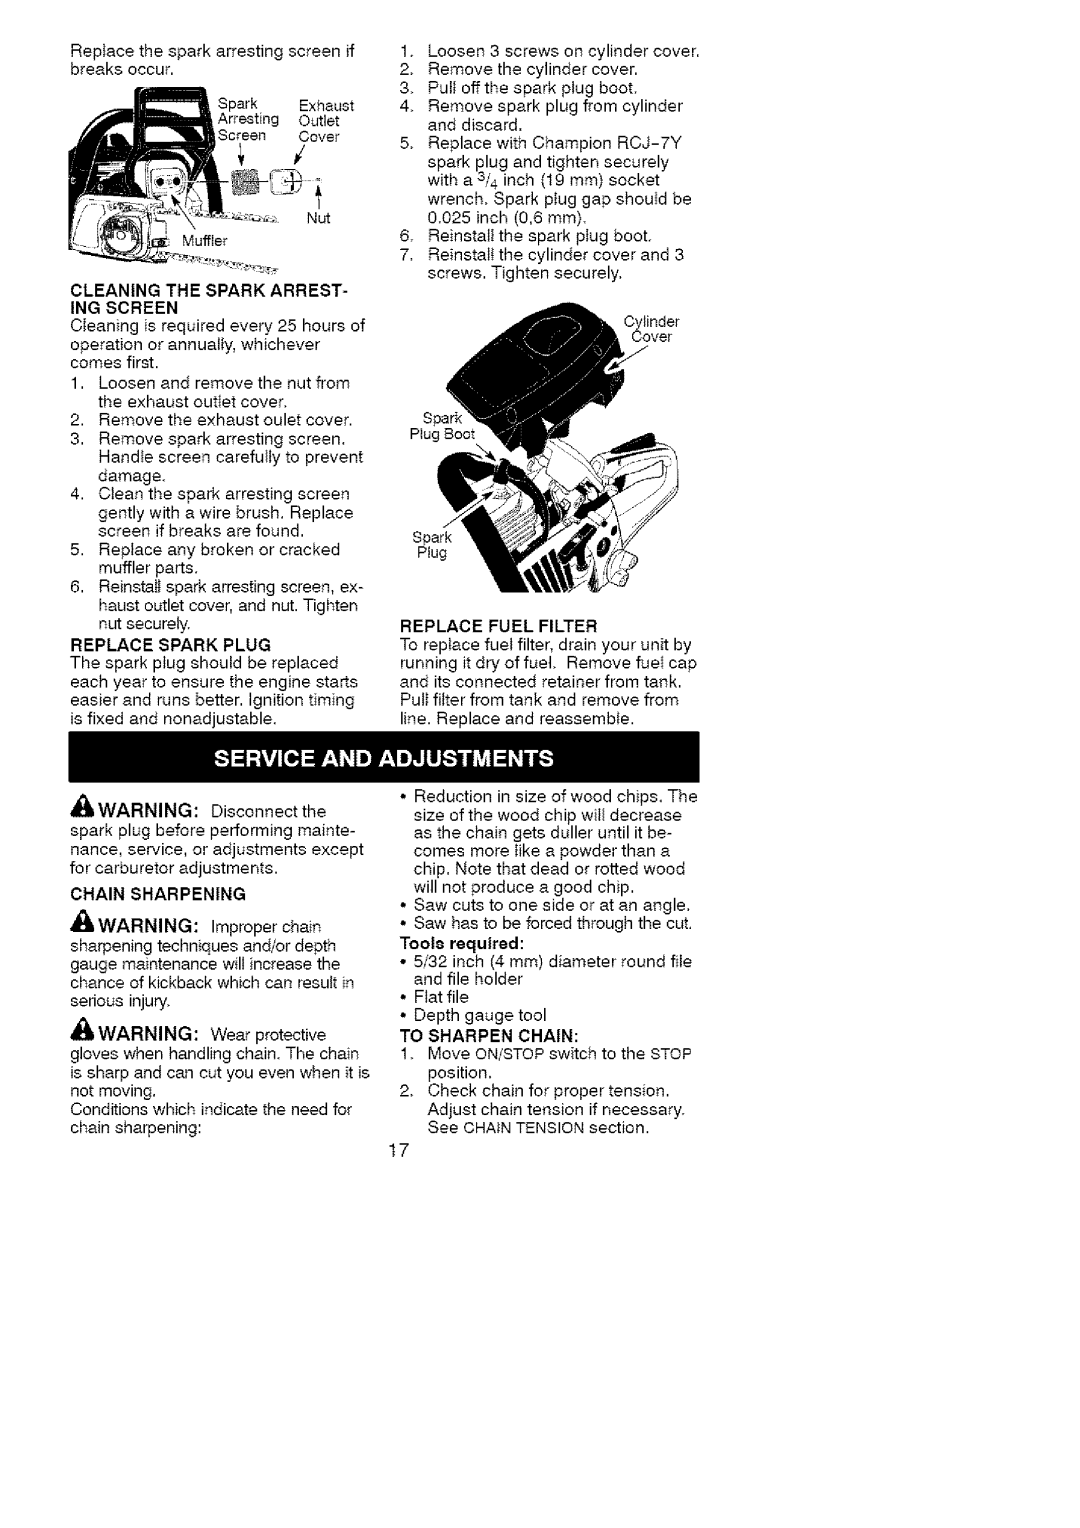 Craftsman 358.35181 manual Tool8 required 